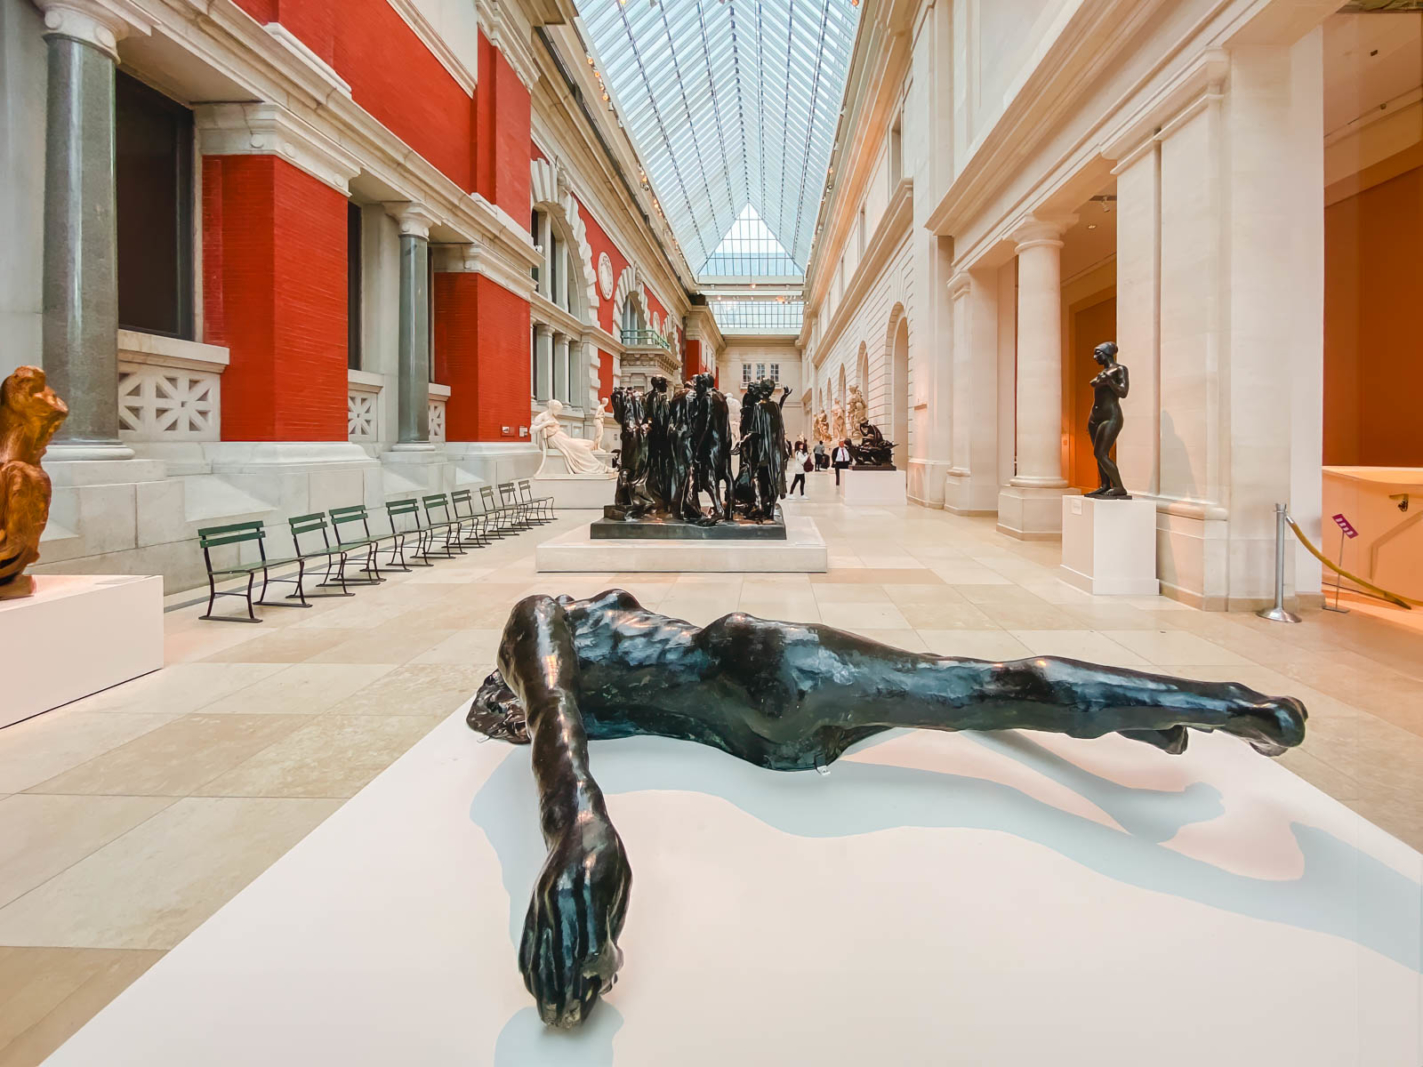 Best Museums in NYC